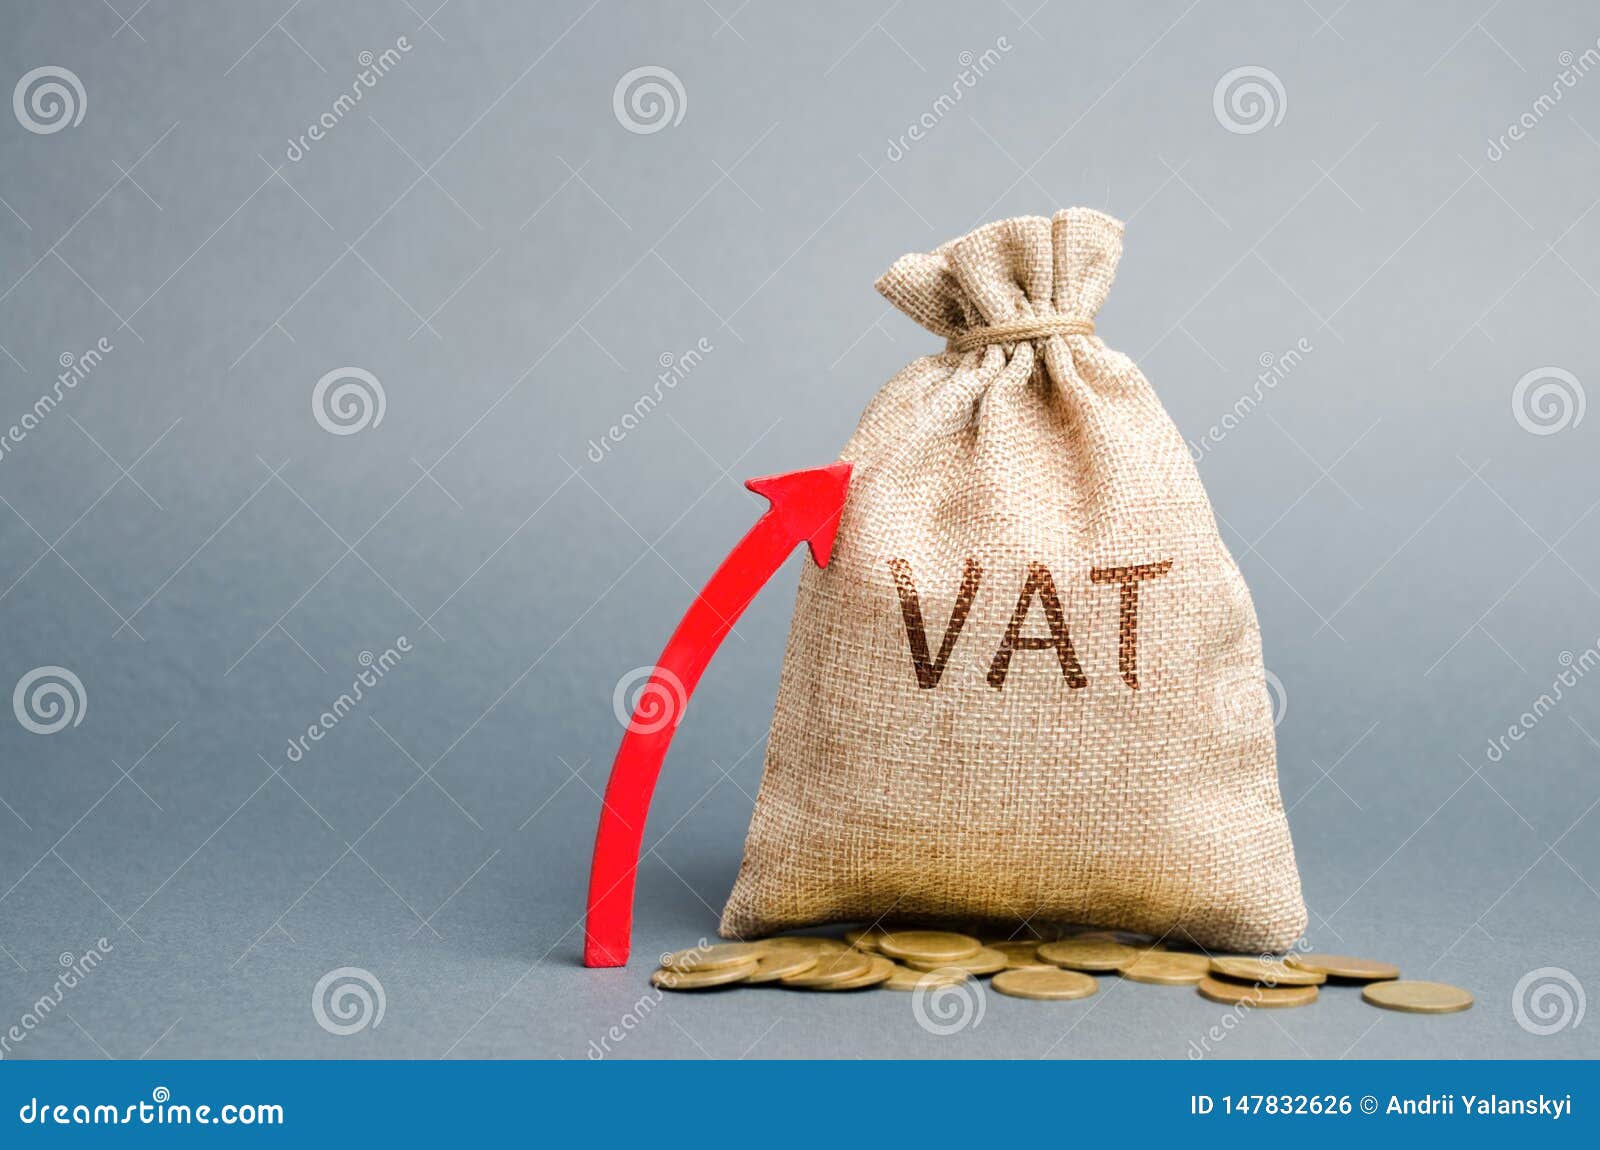 money bag and red up arrow. the concept of increasing vat tax. tax burden on business consumers. vat refund and double taxation